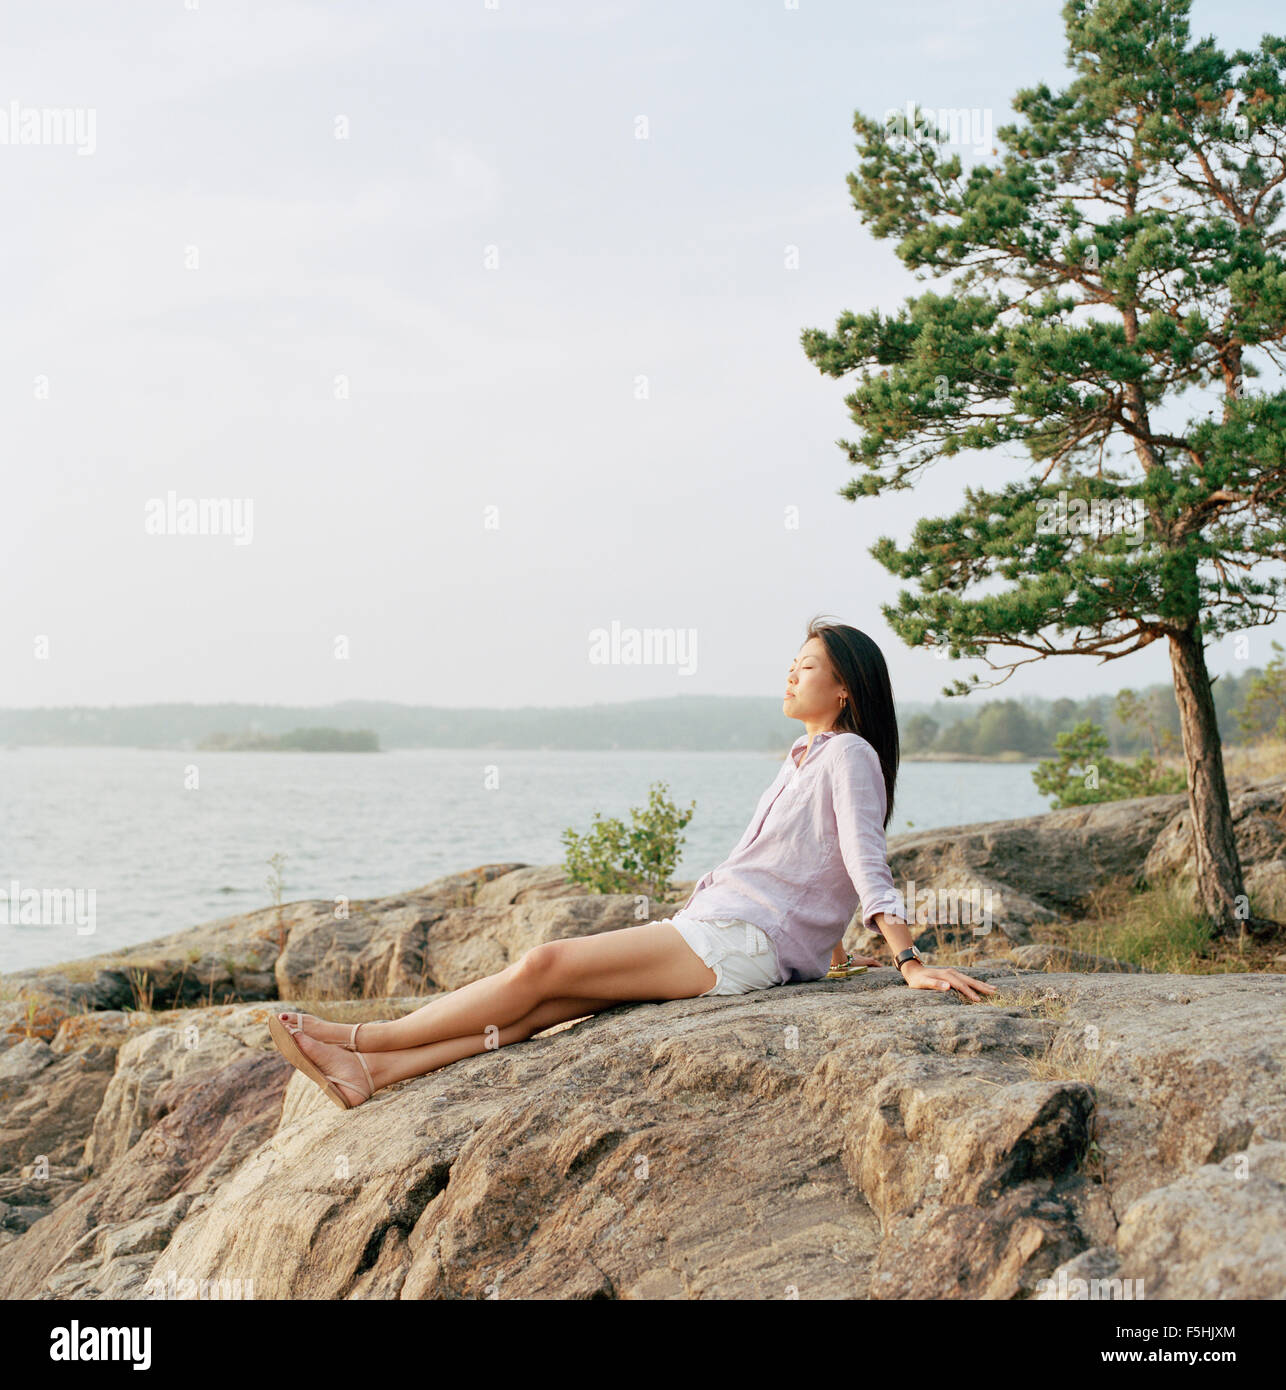 Sweden, Stockholm Archipelago, Sodermanland, Nacka, Mid-adult woman relaxing on beach Stock Photo